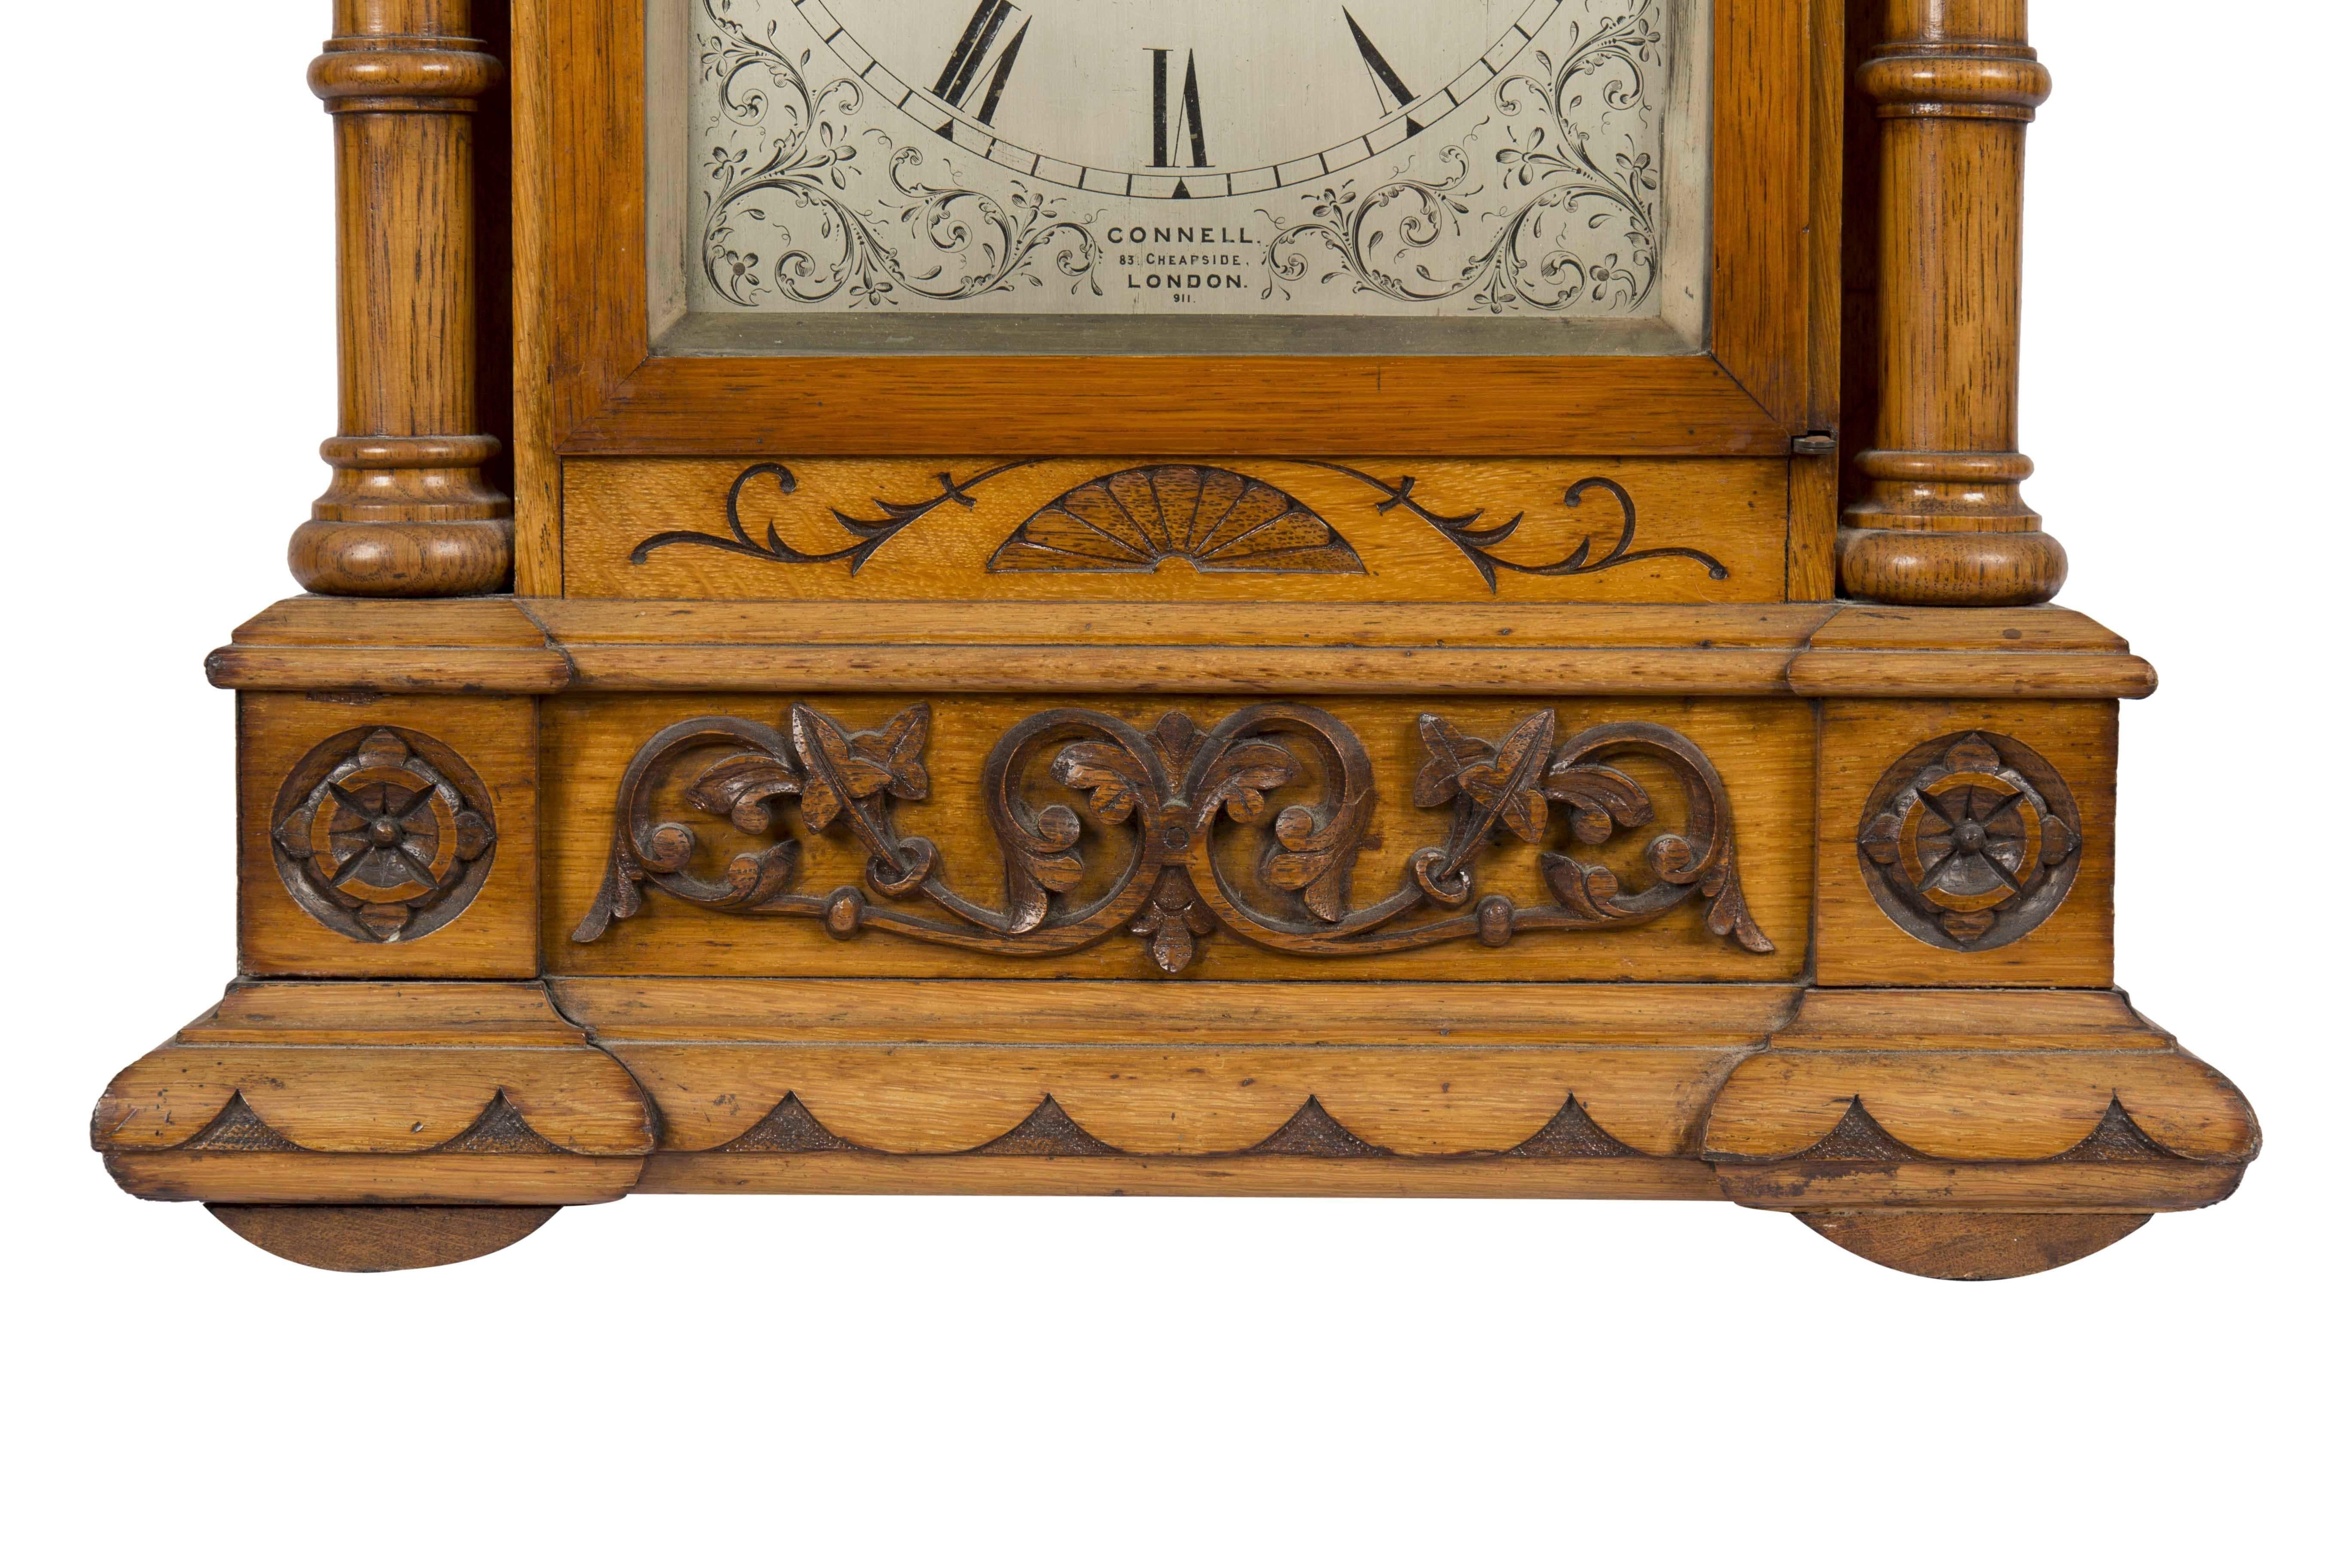 Mid-19th Century Carved Oak Triple Fusee Movement Bracket Clock by Connel 1